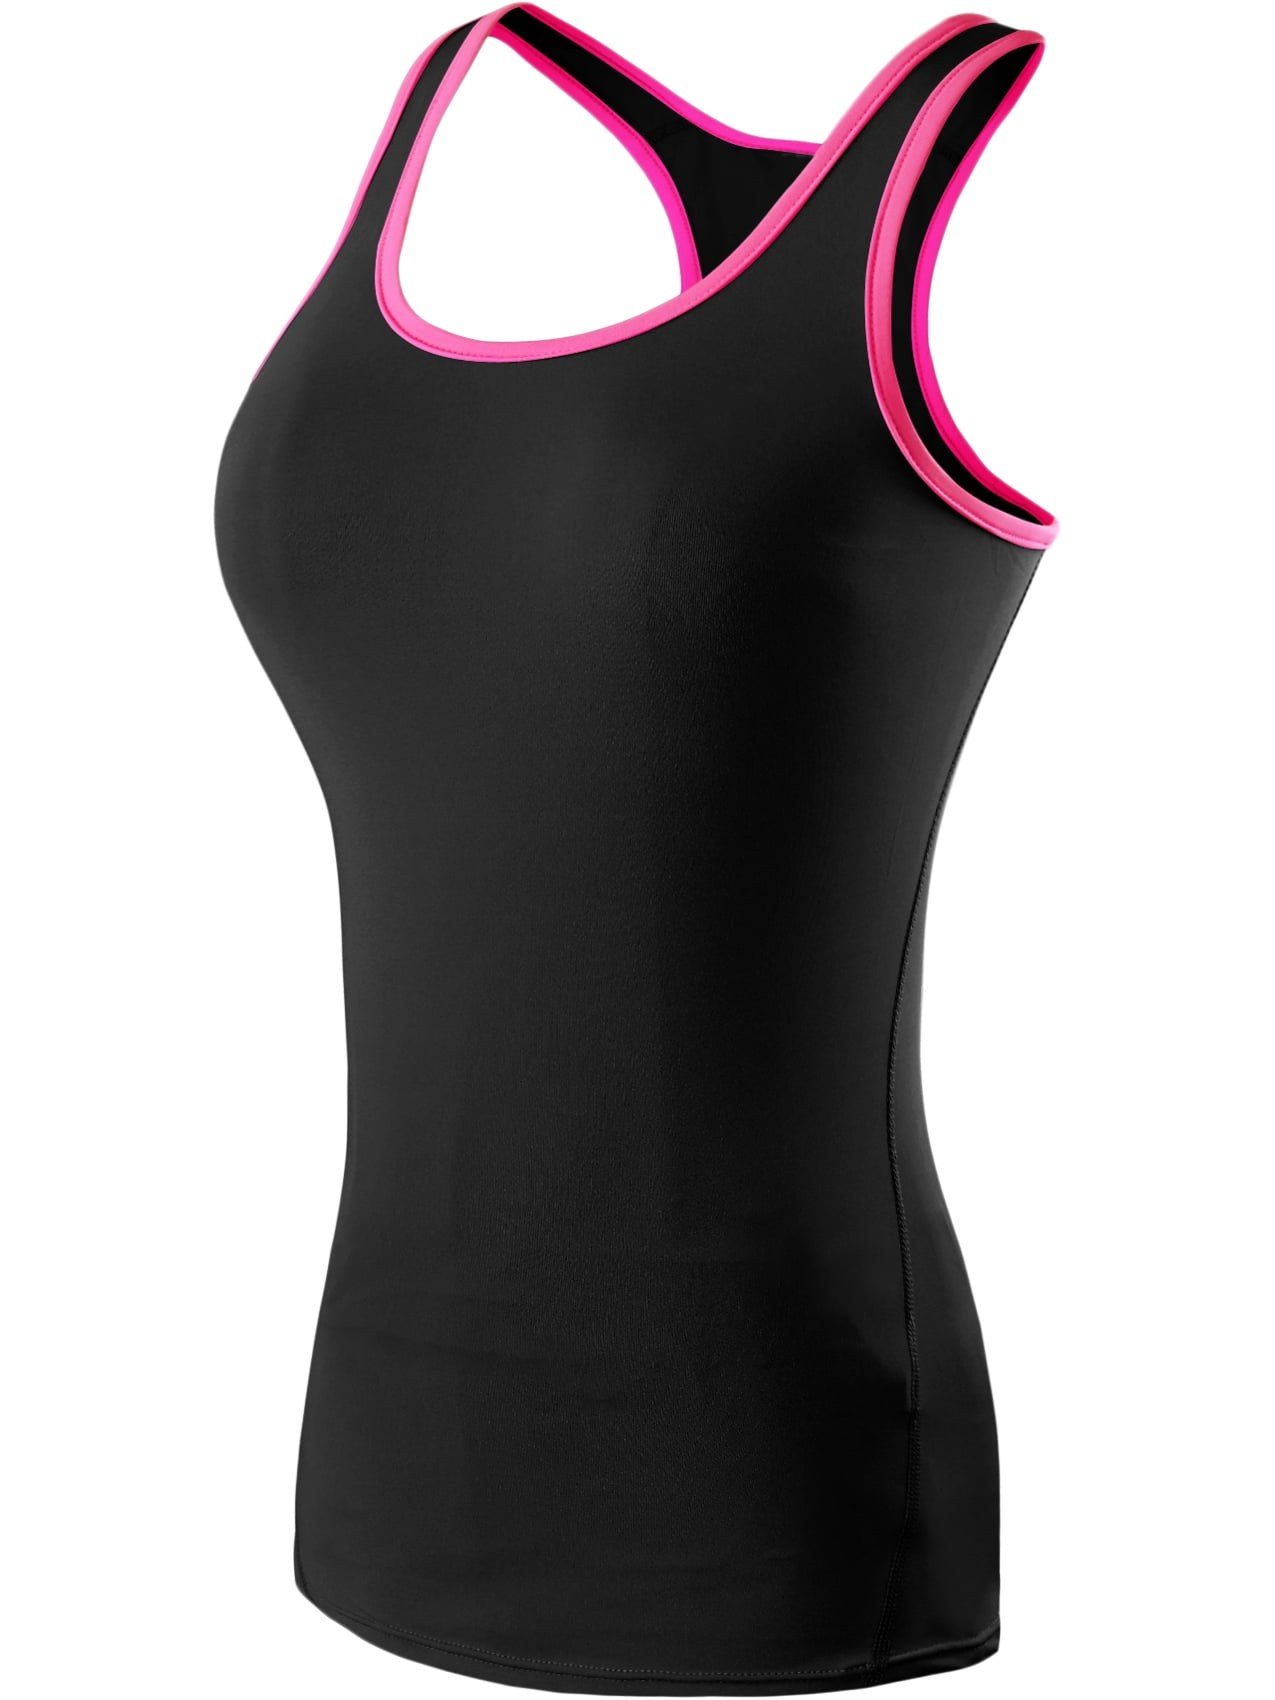 NELEUS Womens Compression Base Layer Dry Fit Tank Top 3  Pack,Blue+Green+Pink,US Size XS 